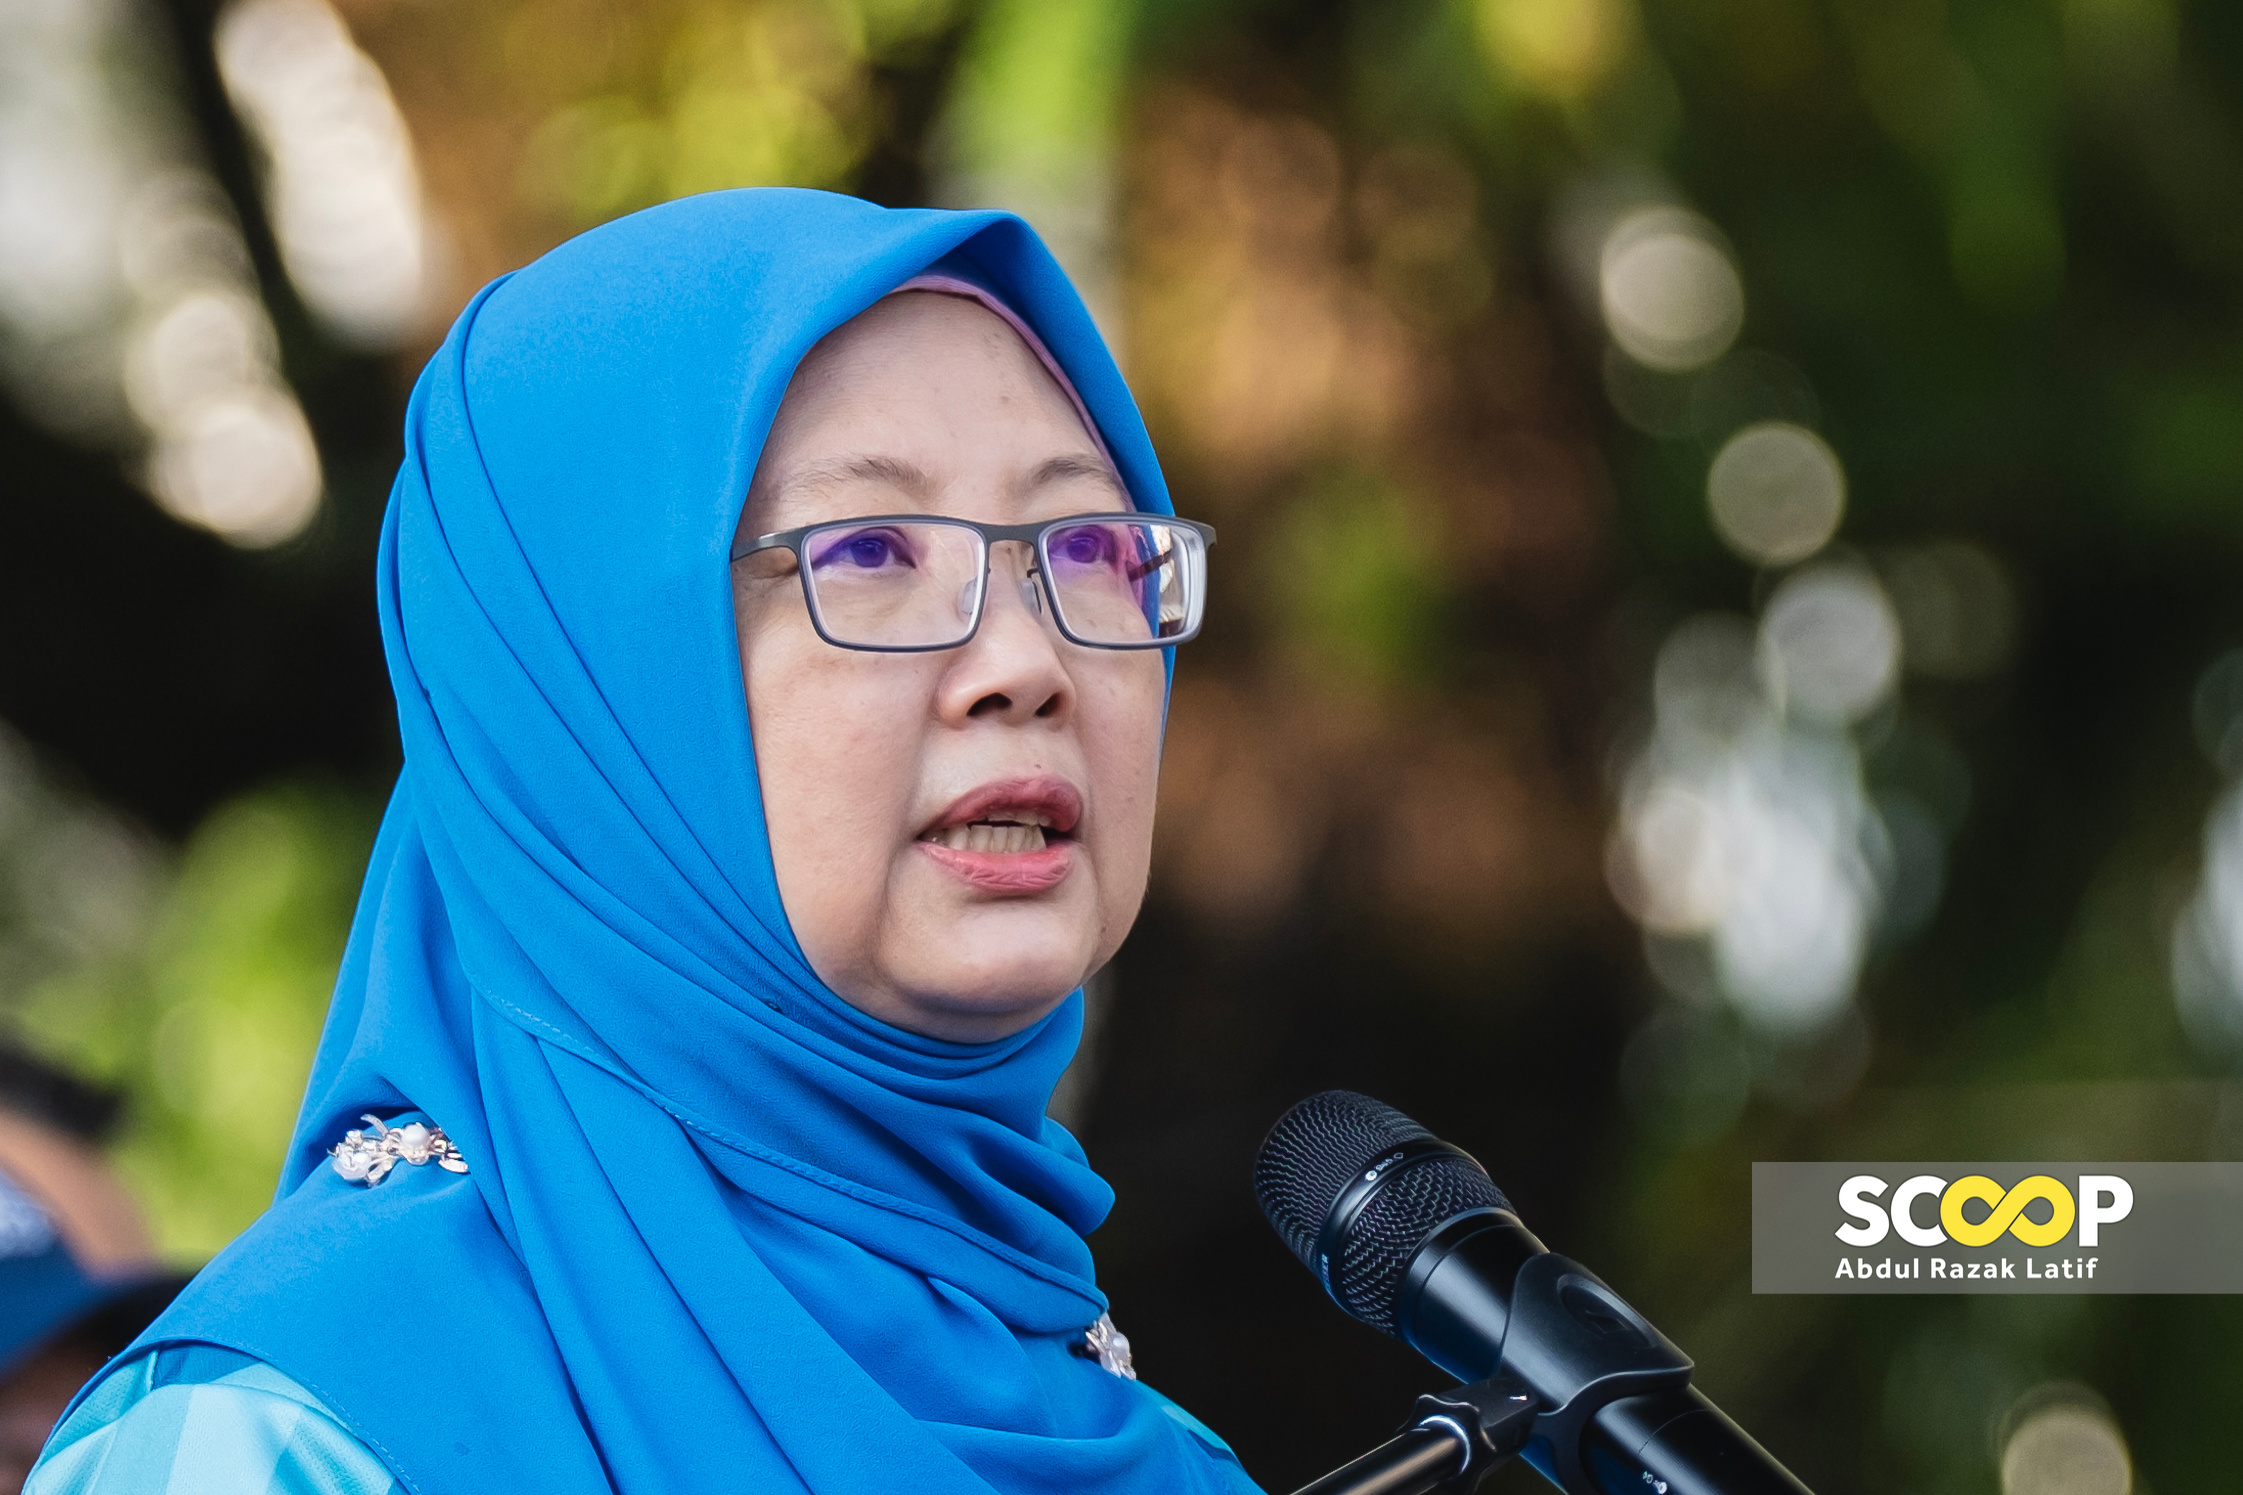 Govt expected to spend 4.5 times less per civil servant with new remuneration scheme: Zaliha